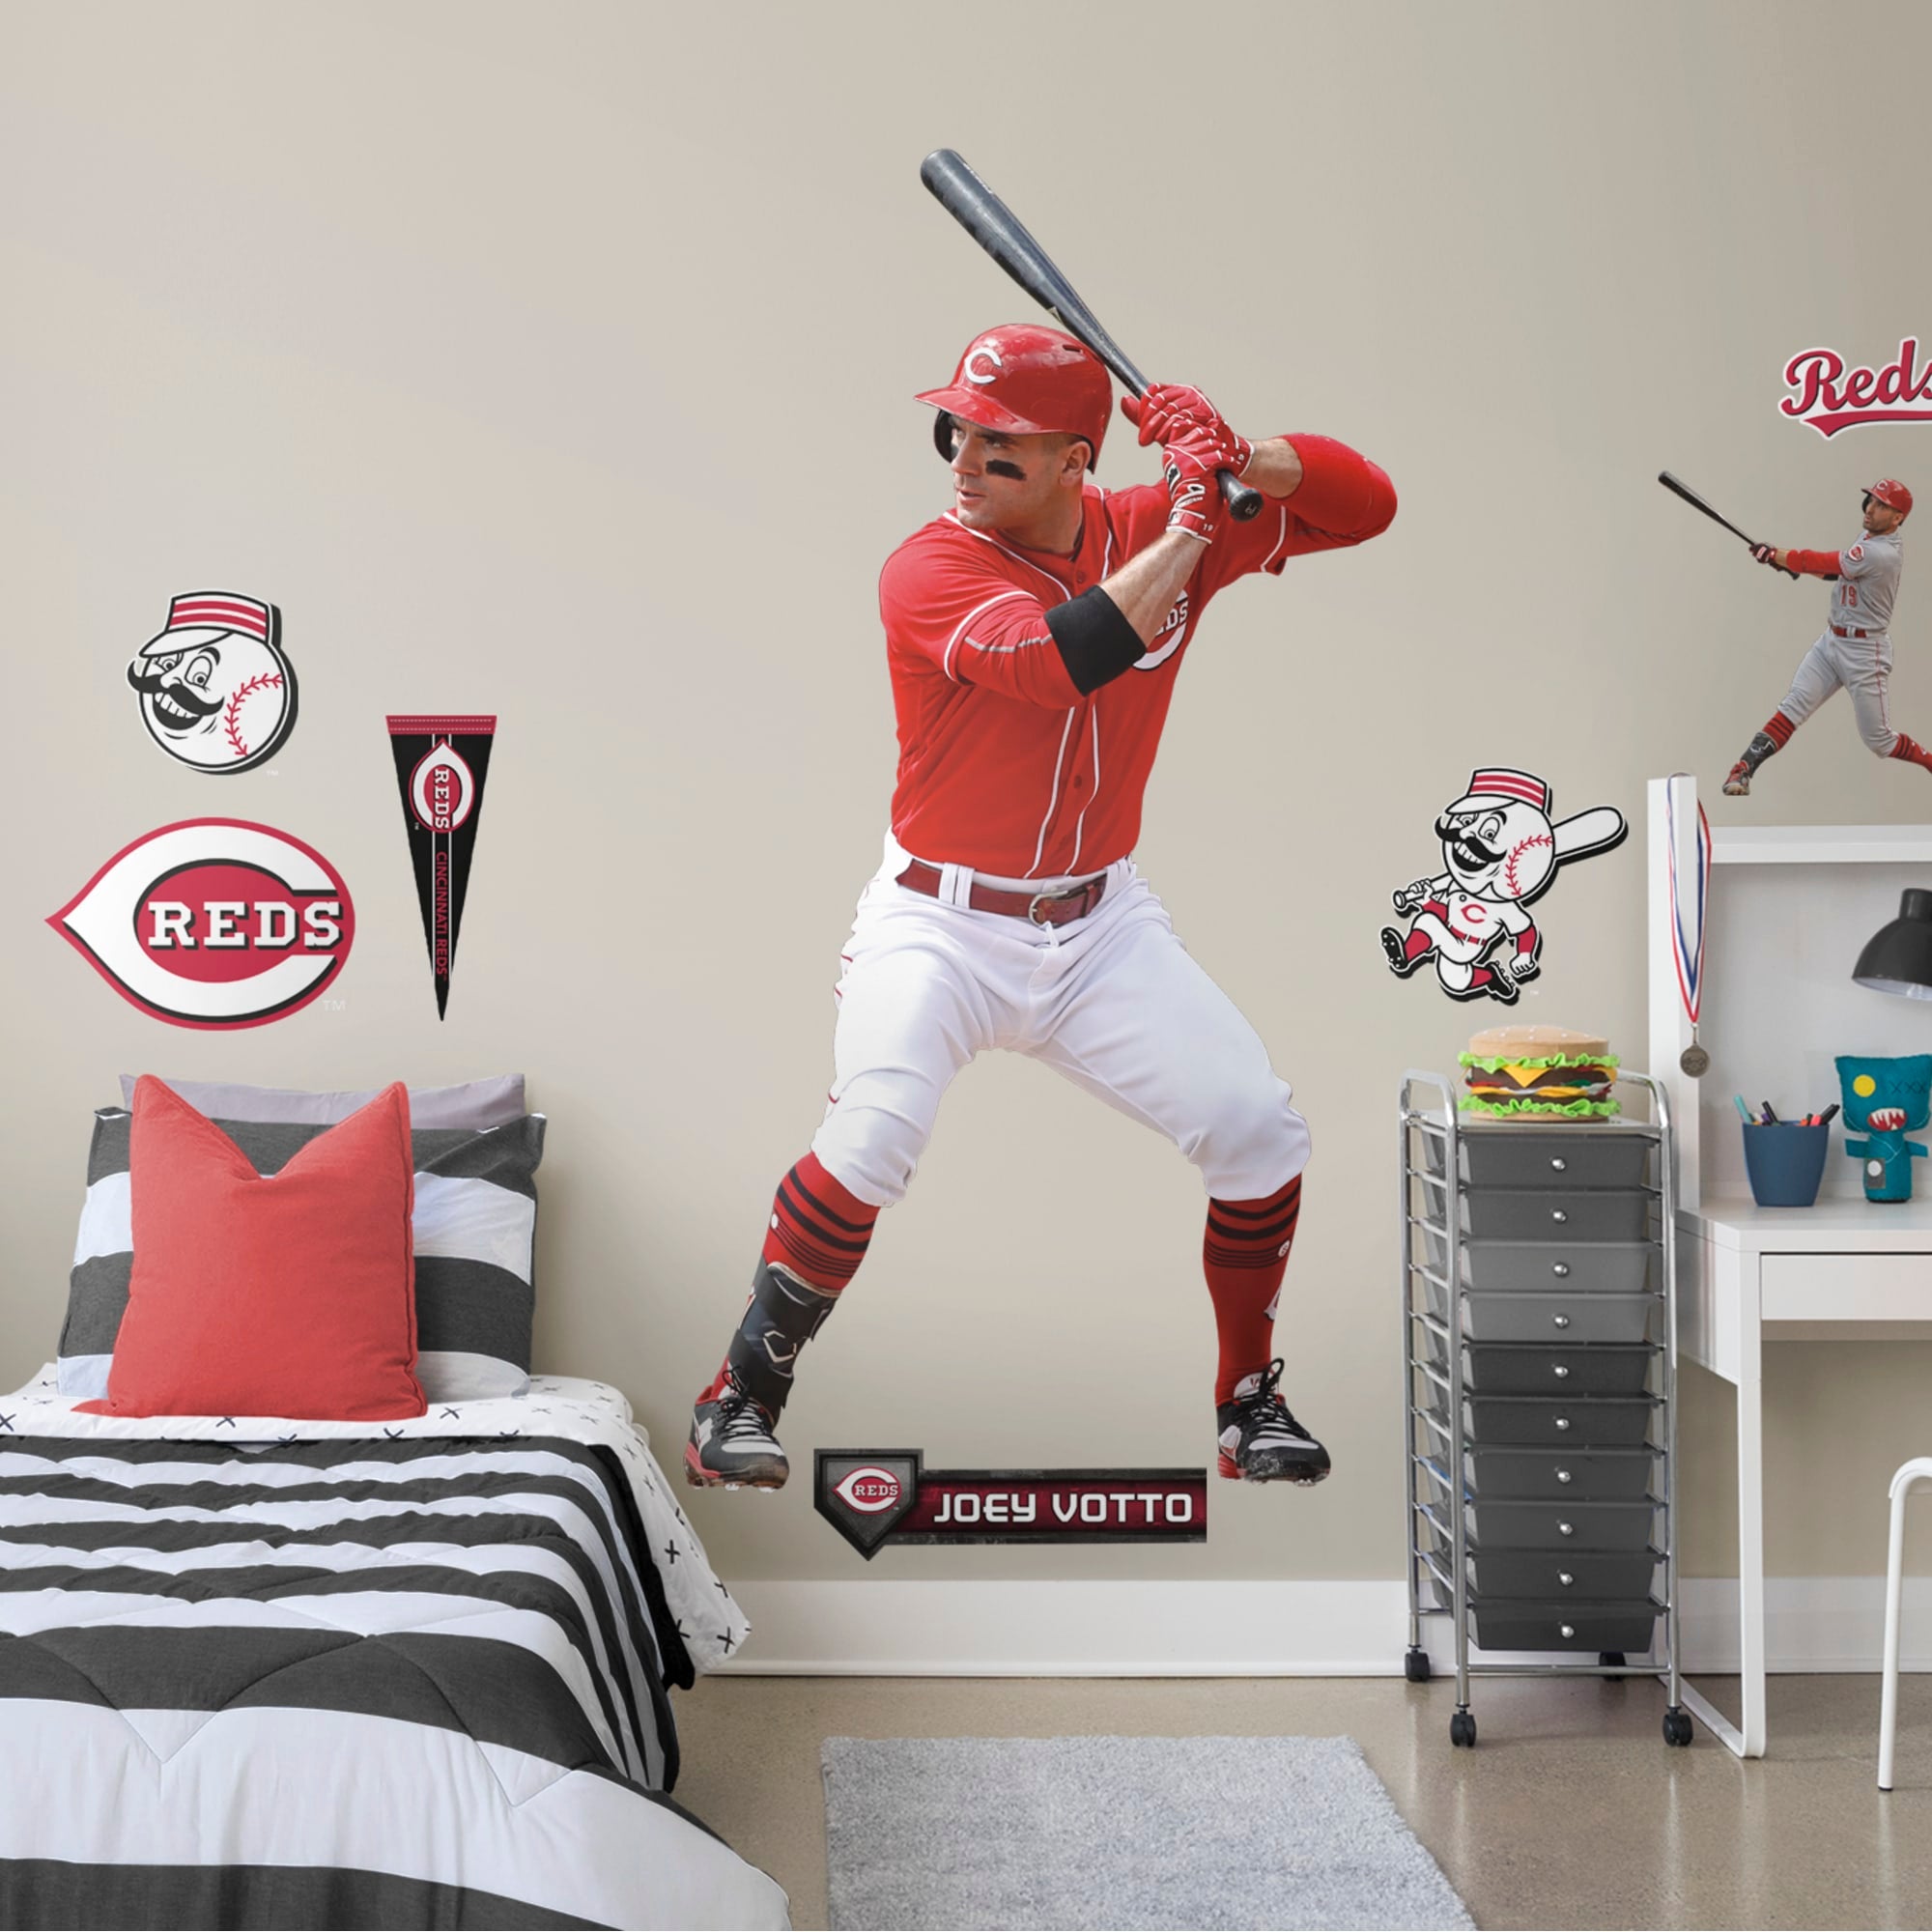 Joey Votto for Cincinnati Reds - Officially Licensed MLB Removable Wall Decal Life-Size Athlete + 11 Decals (45"W x 85"H) by Fat